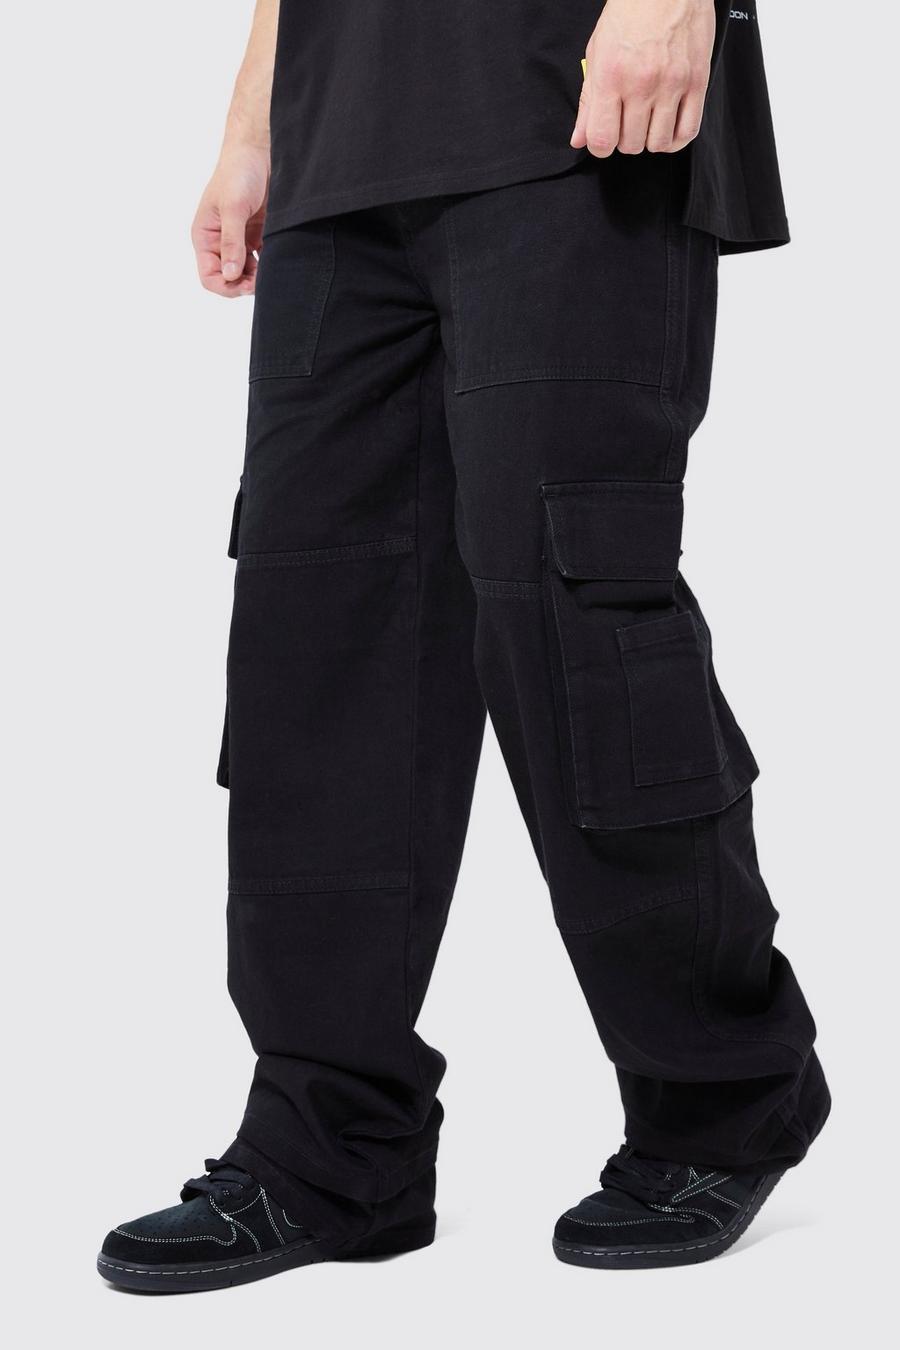 Black Tall Baggy Cargo Jeans